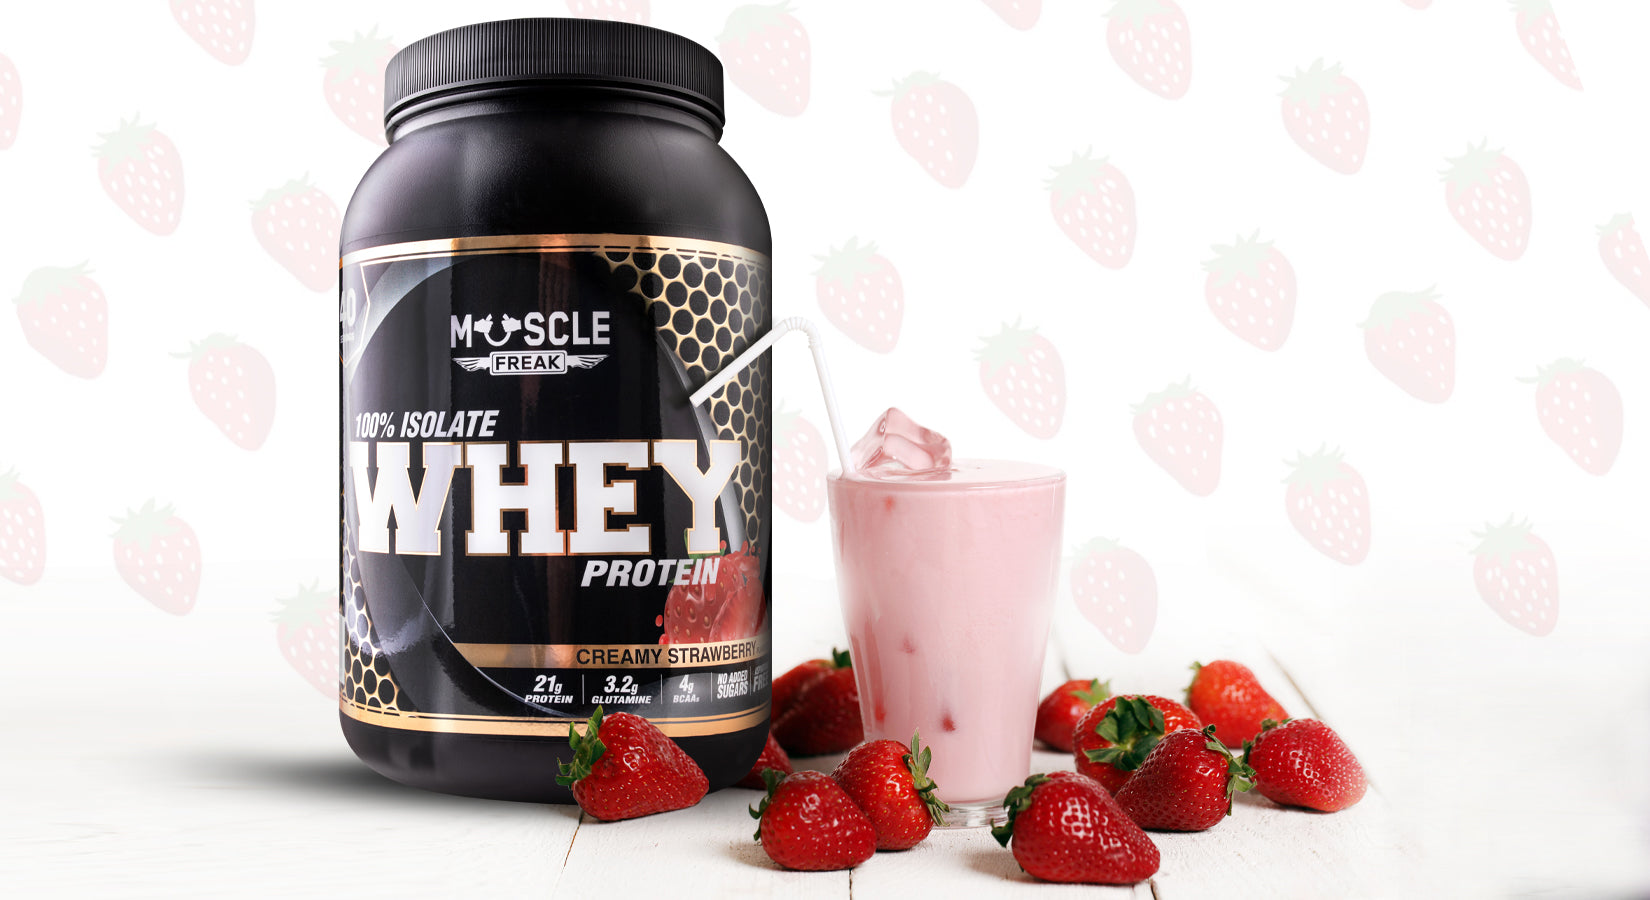 Muscle Freak whey smoothie